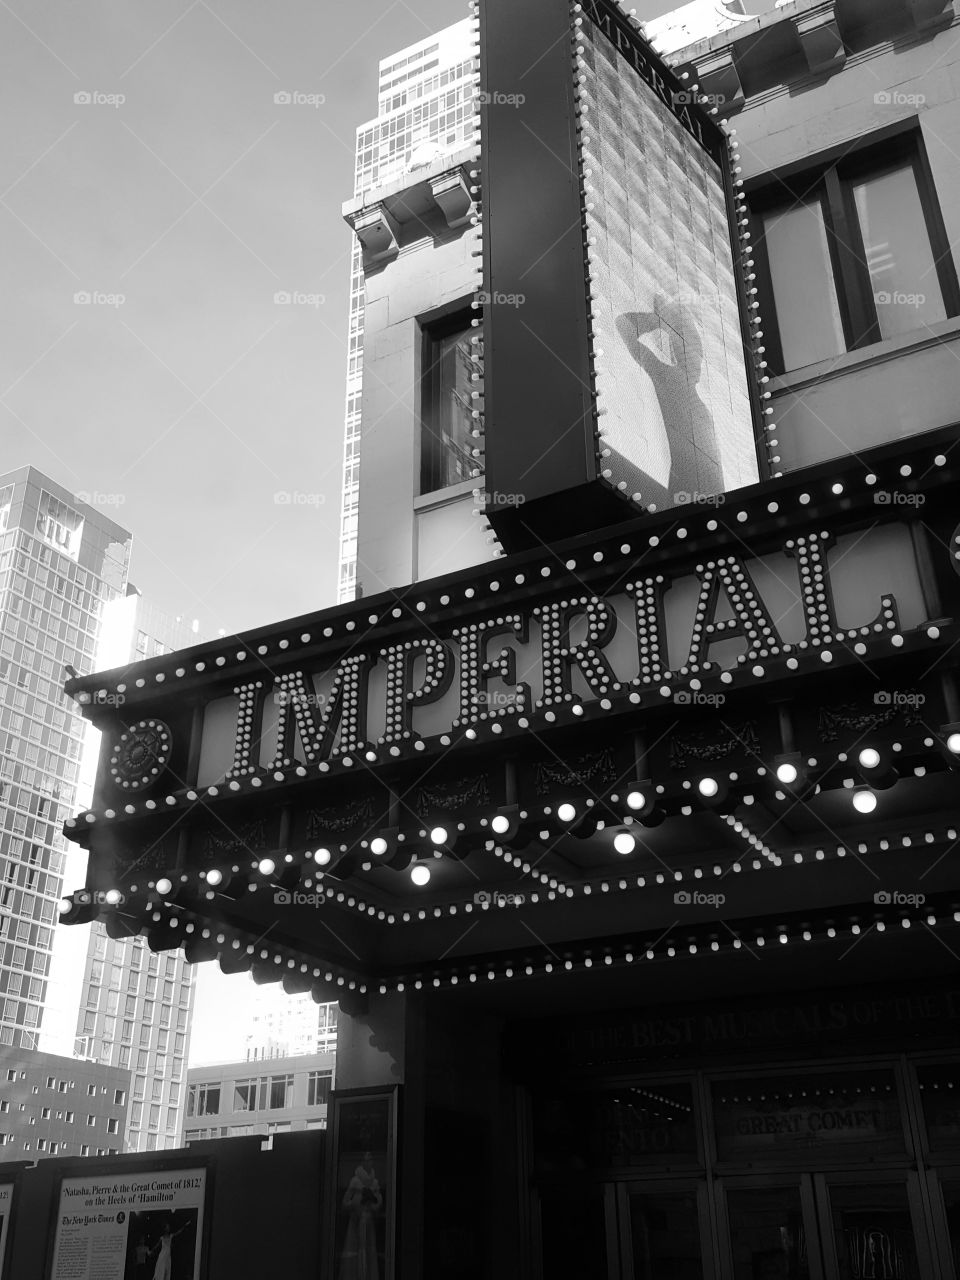 The legendary Imperial Theater in New York City.